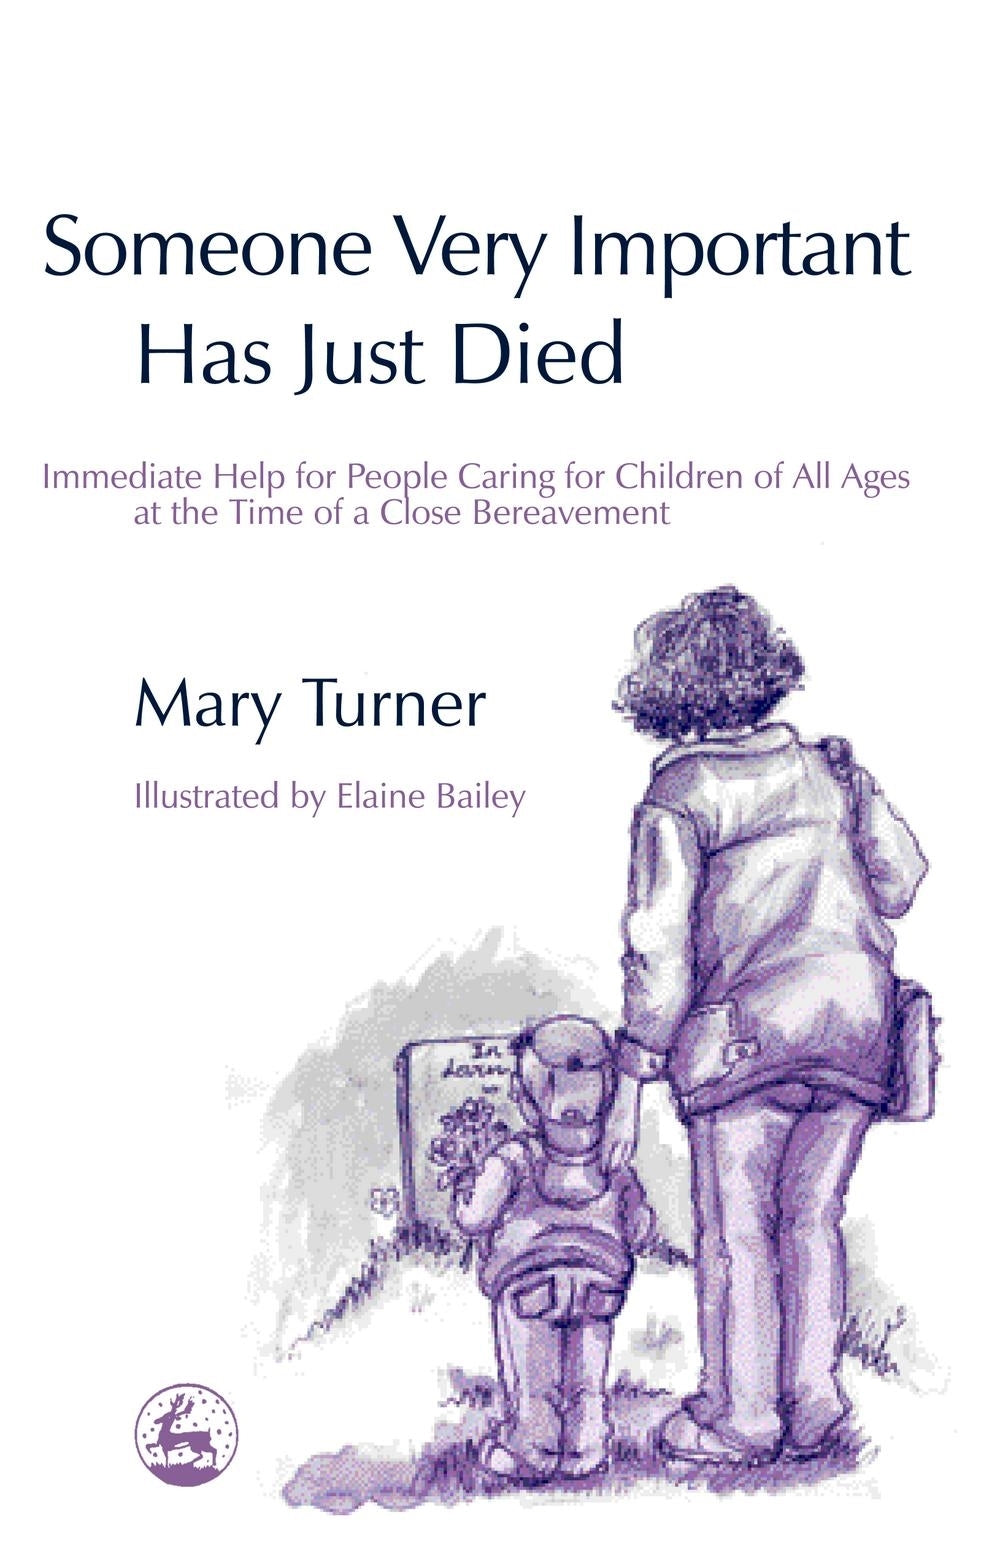 Someone Very Important Has Just Died by Mary Turner, Elaine Bailey